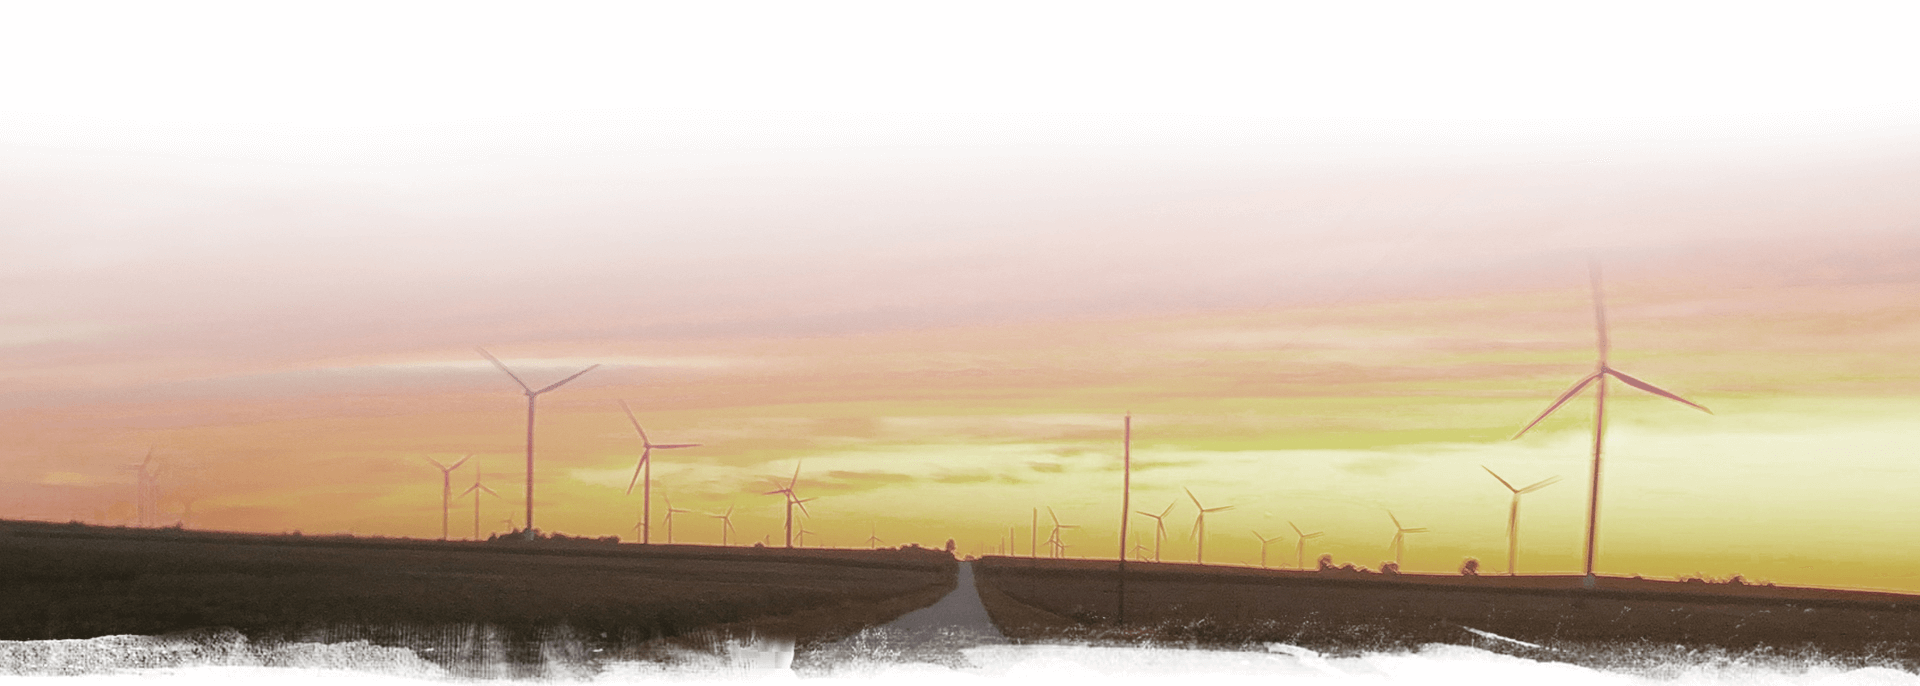 a benton county sunset with windmills